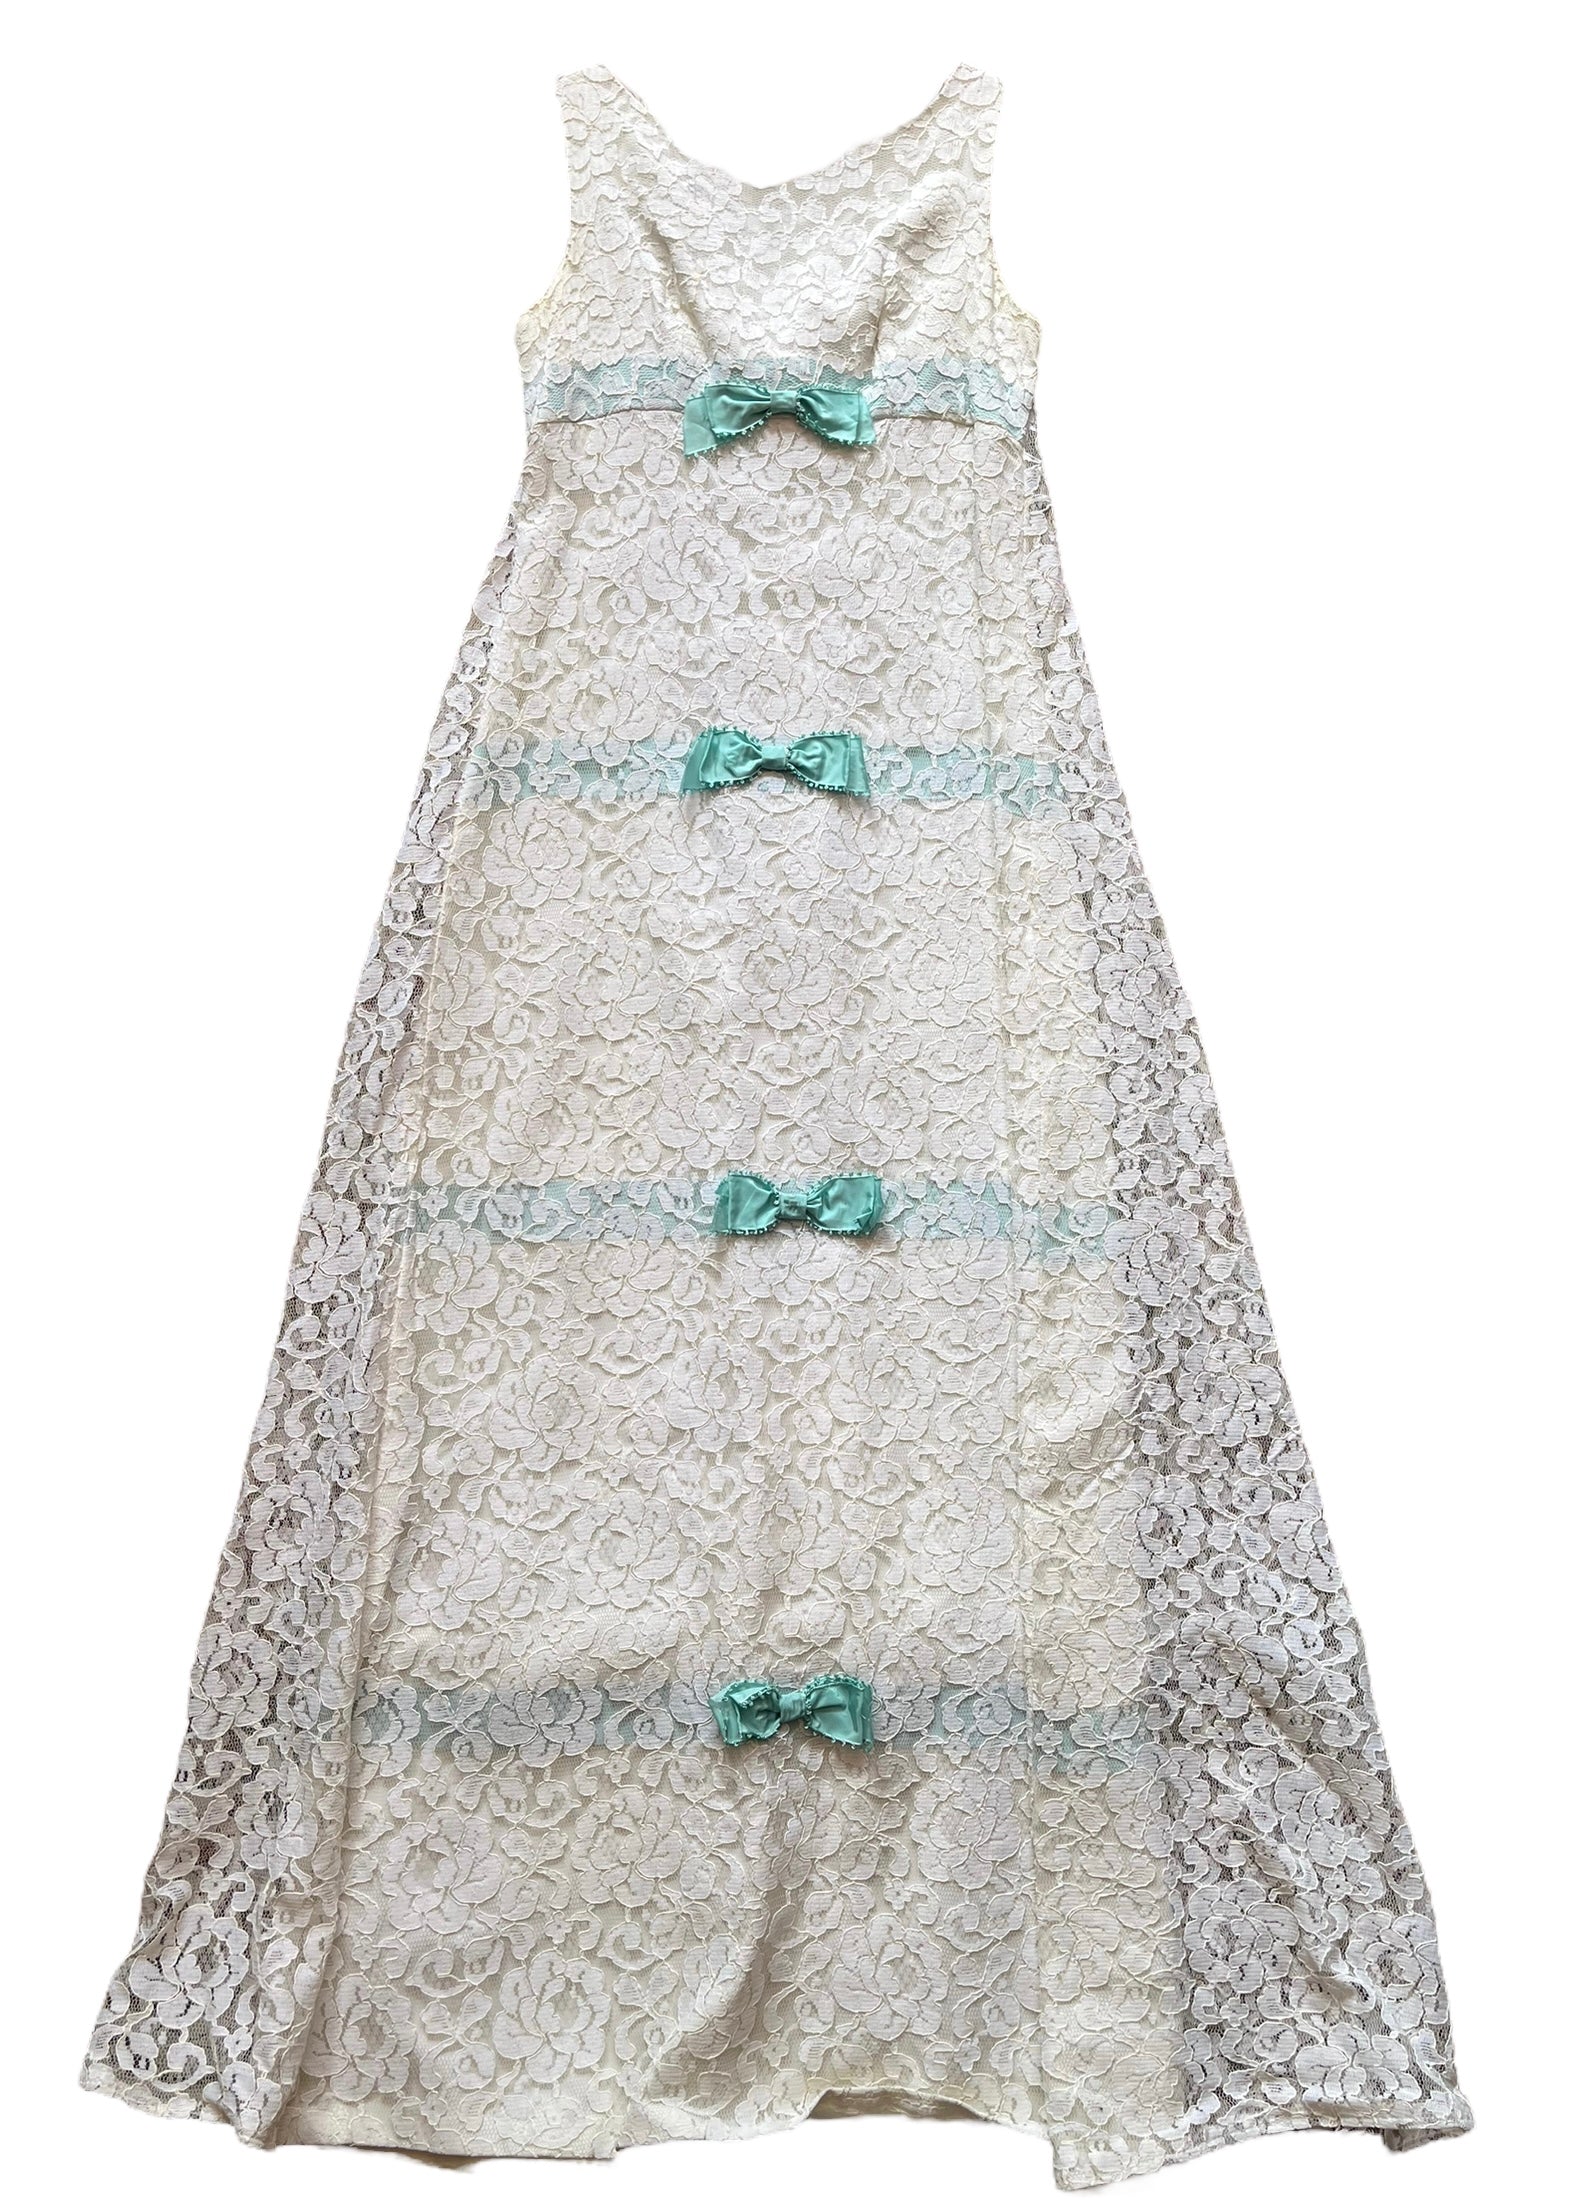 Full front view of Vintage 1960s Lace Dress with Blue Bows